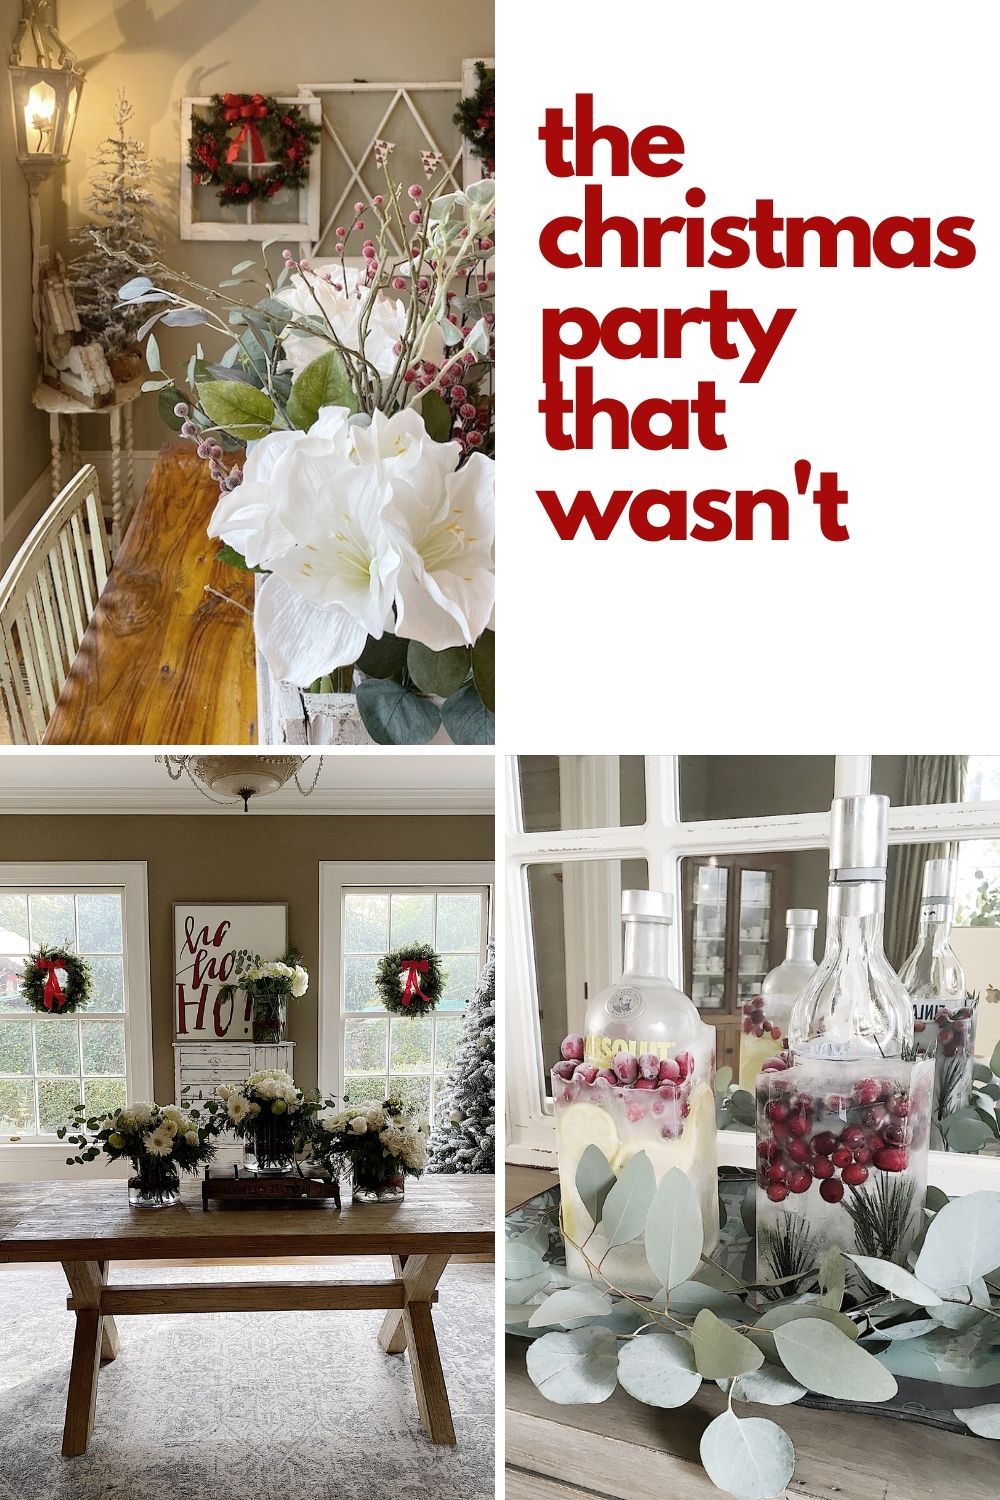 For the first time in 30 years, we didn't have our Christmas party. We had a small gathering with our family of six, but it just wasn't the same.